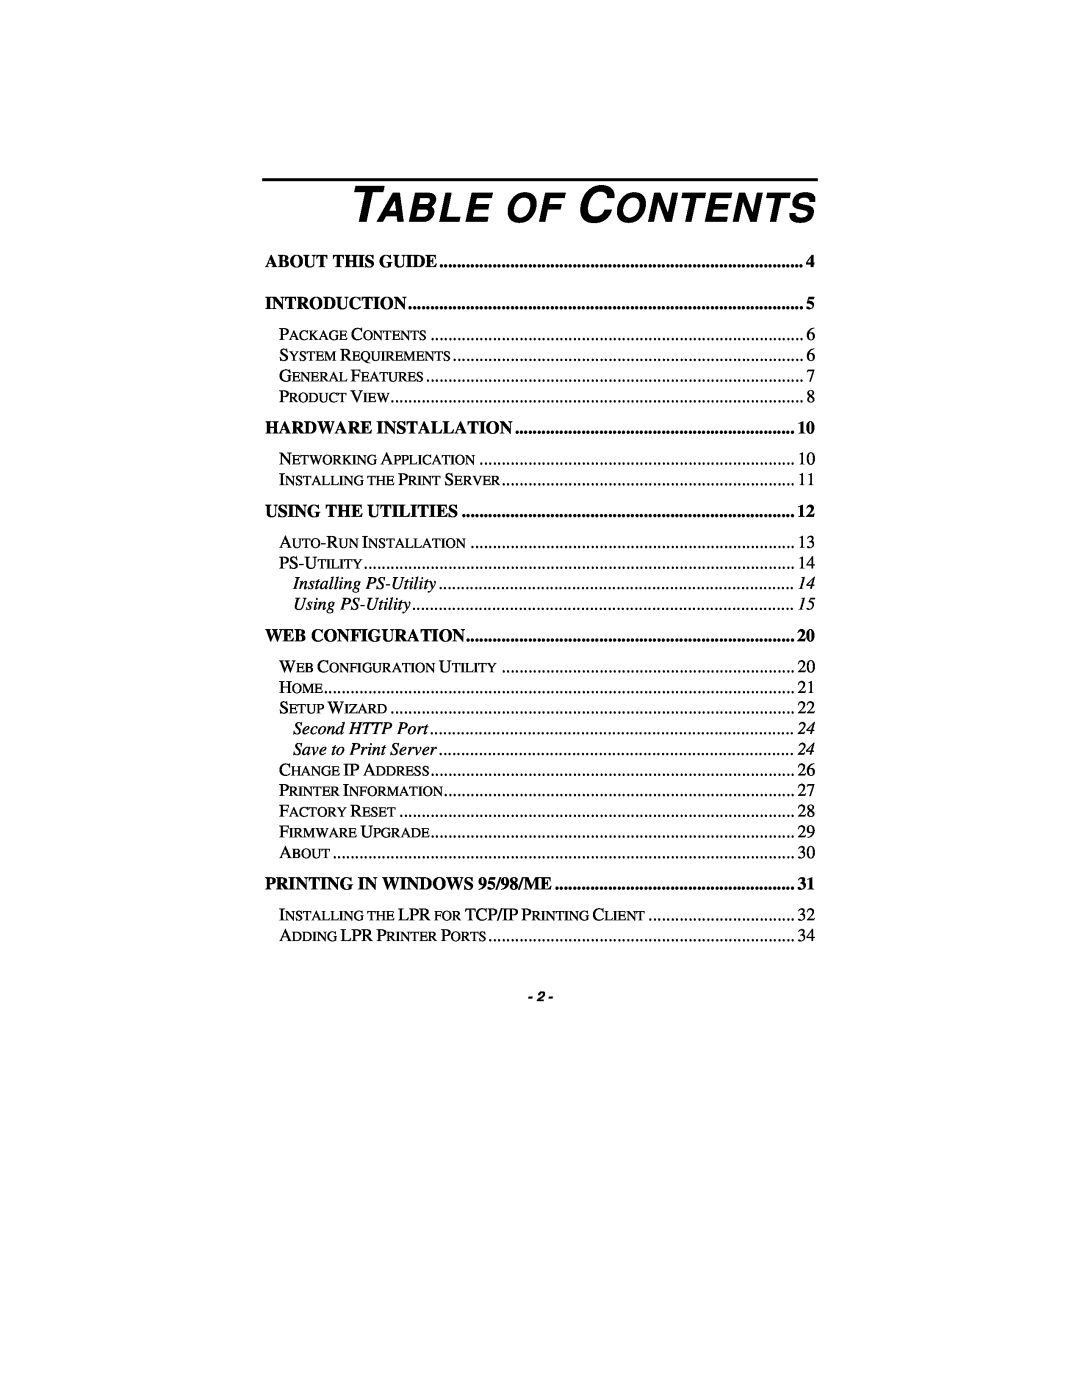 TRENDnet TE100-P1U manual Table Of Contents, About This Guide, Introduction, Hardware Installation, Using The Utilities 